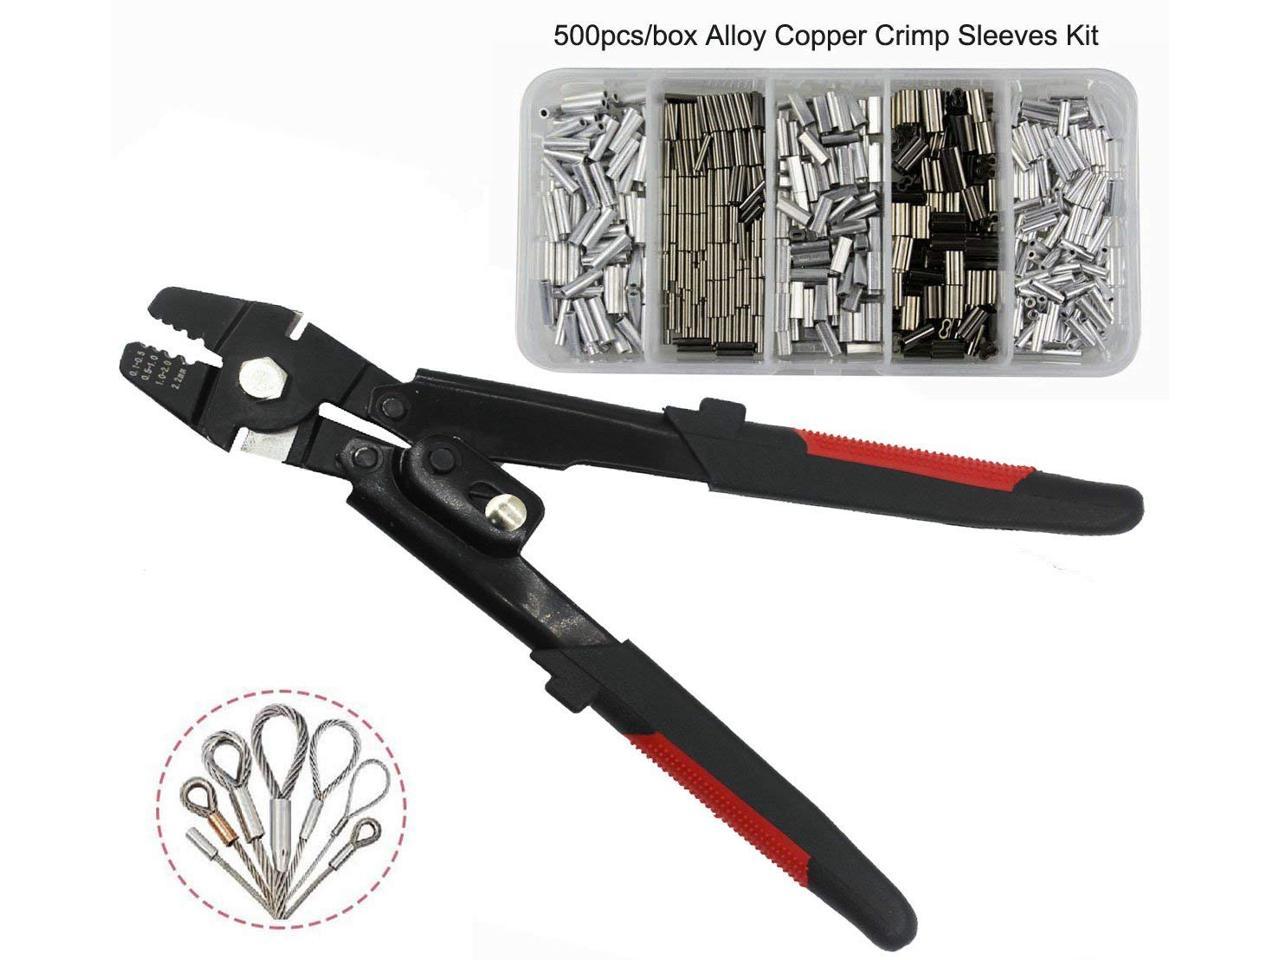 Fishing Pliers Stainless Steel Wire Rope Swager Crimpers Alloy Crimp Sleeves Set 